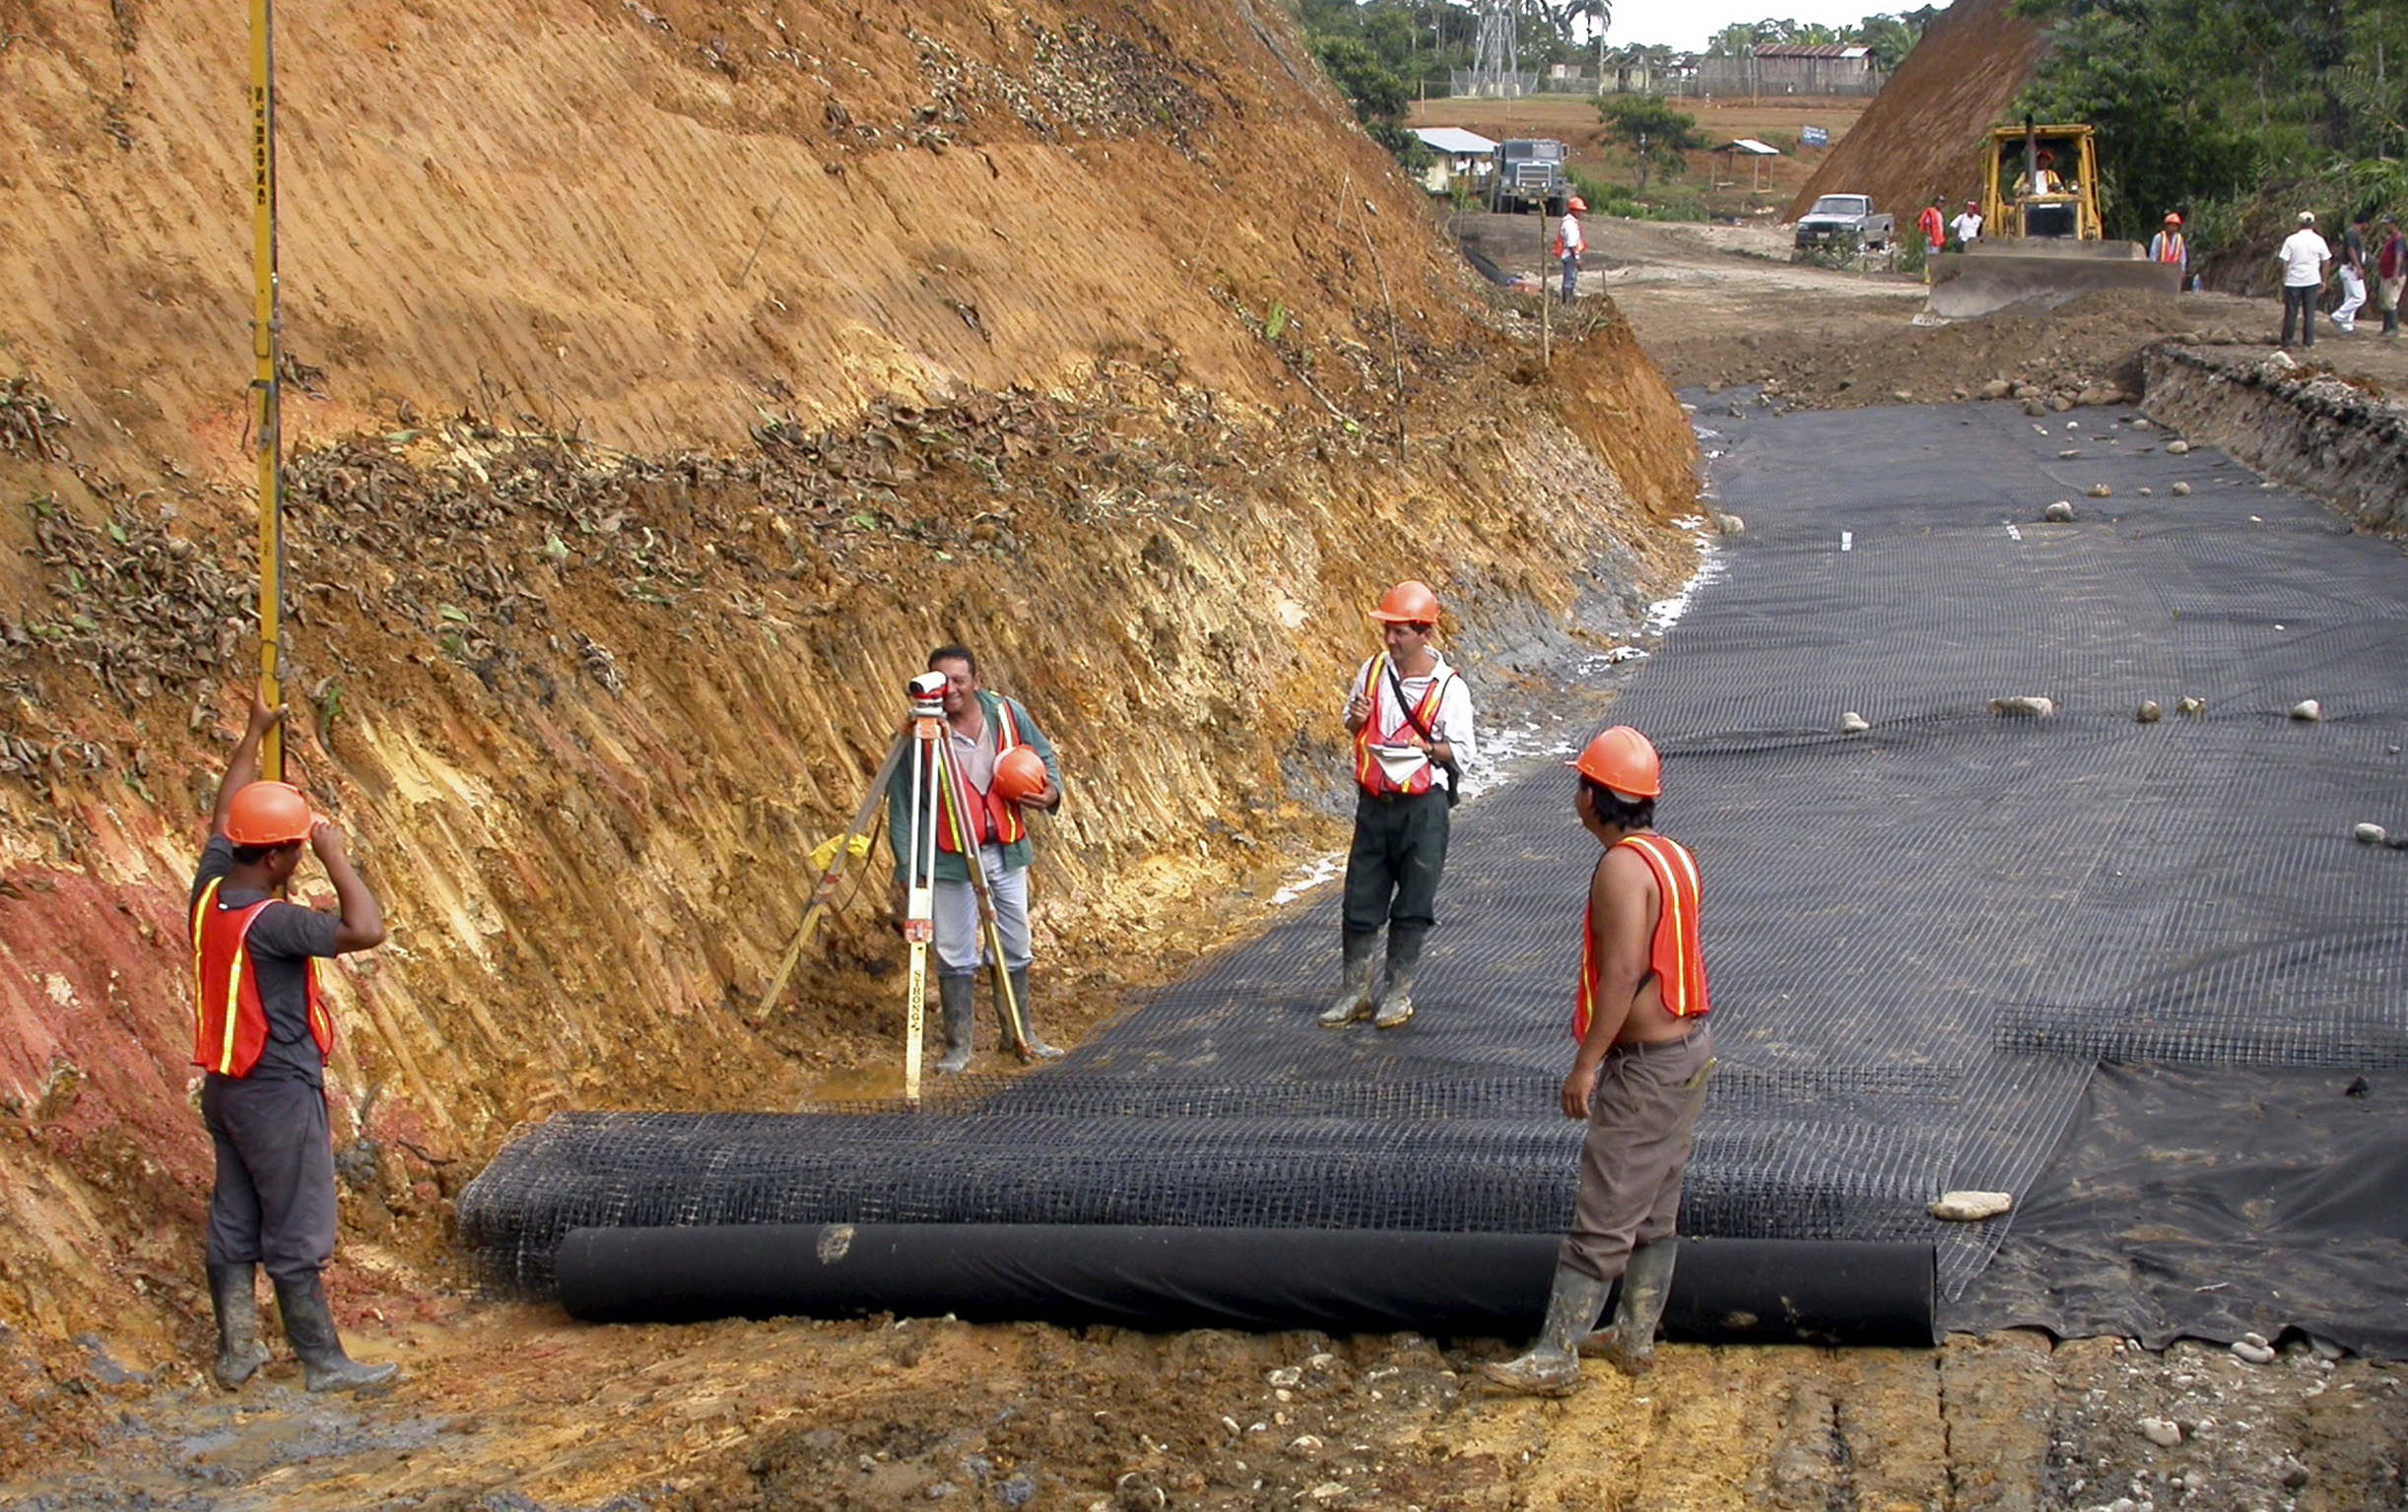 The service lifespan of geotextiles used in road construction can be extended with light stabilizers from BASF.